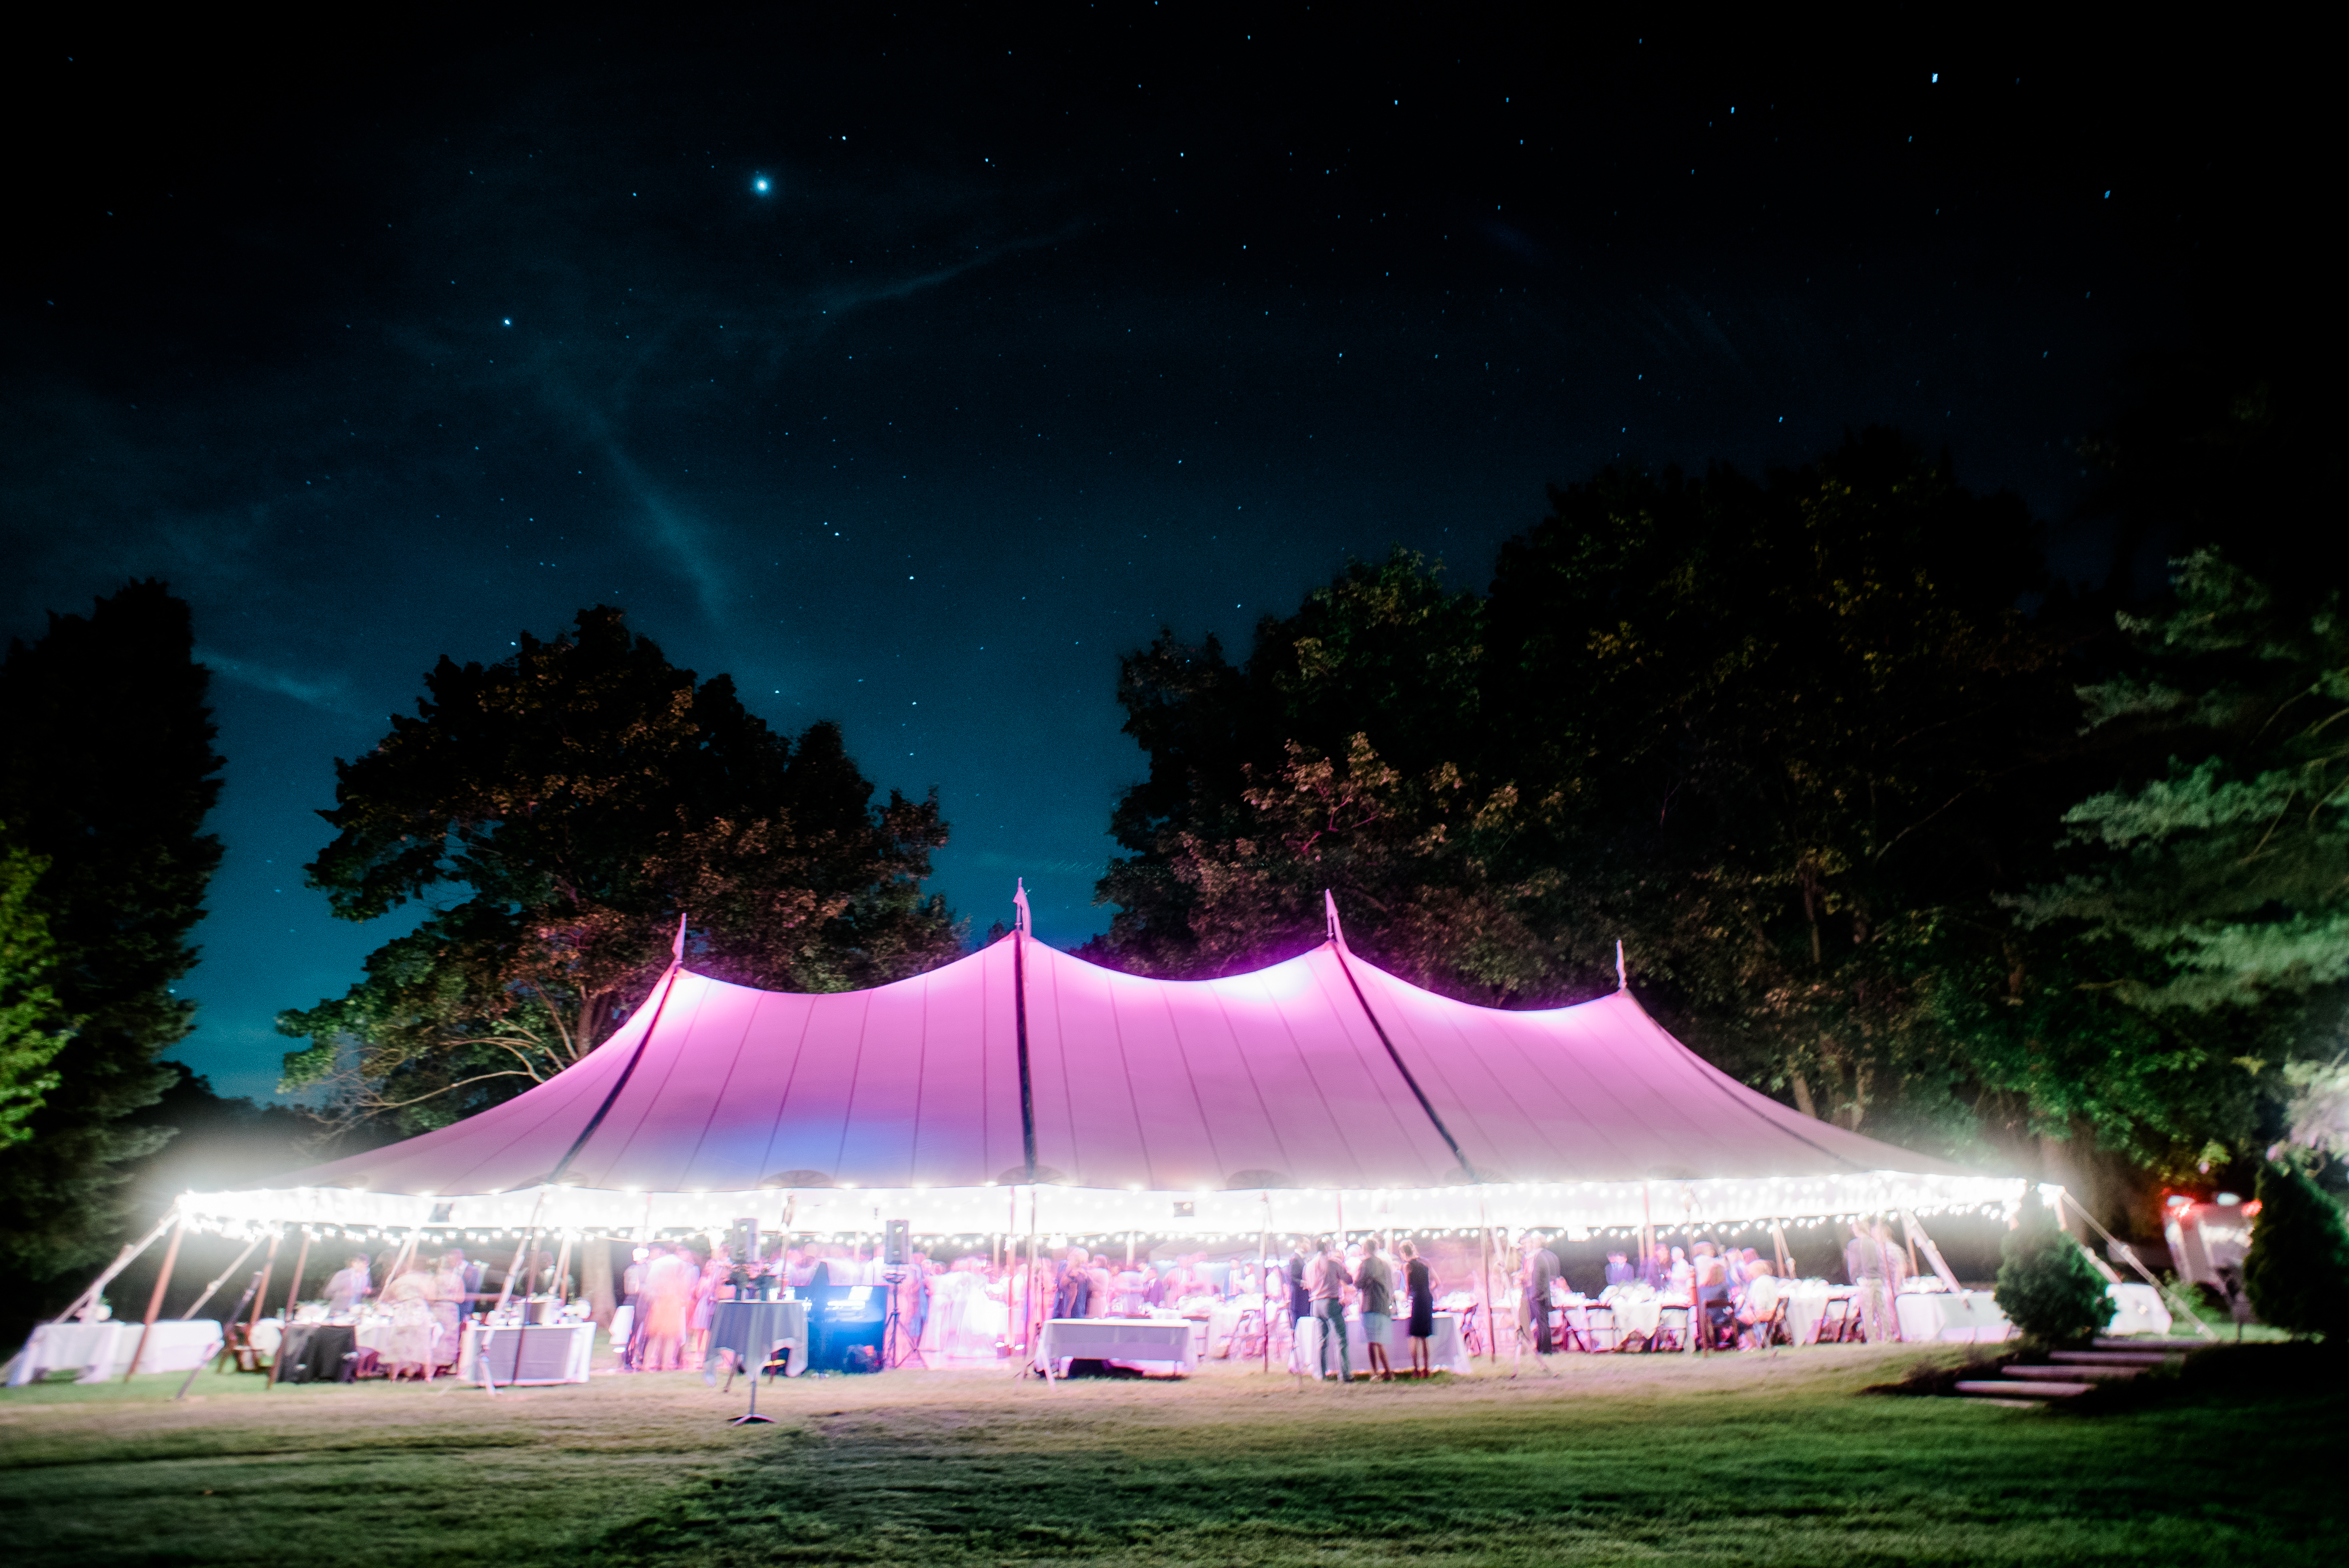 Six QolorPoint Wireless LED Uplighters at an Outdoor Wedding in Garrison, NY (Rachel Pearlman)